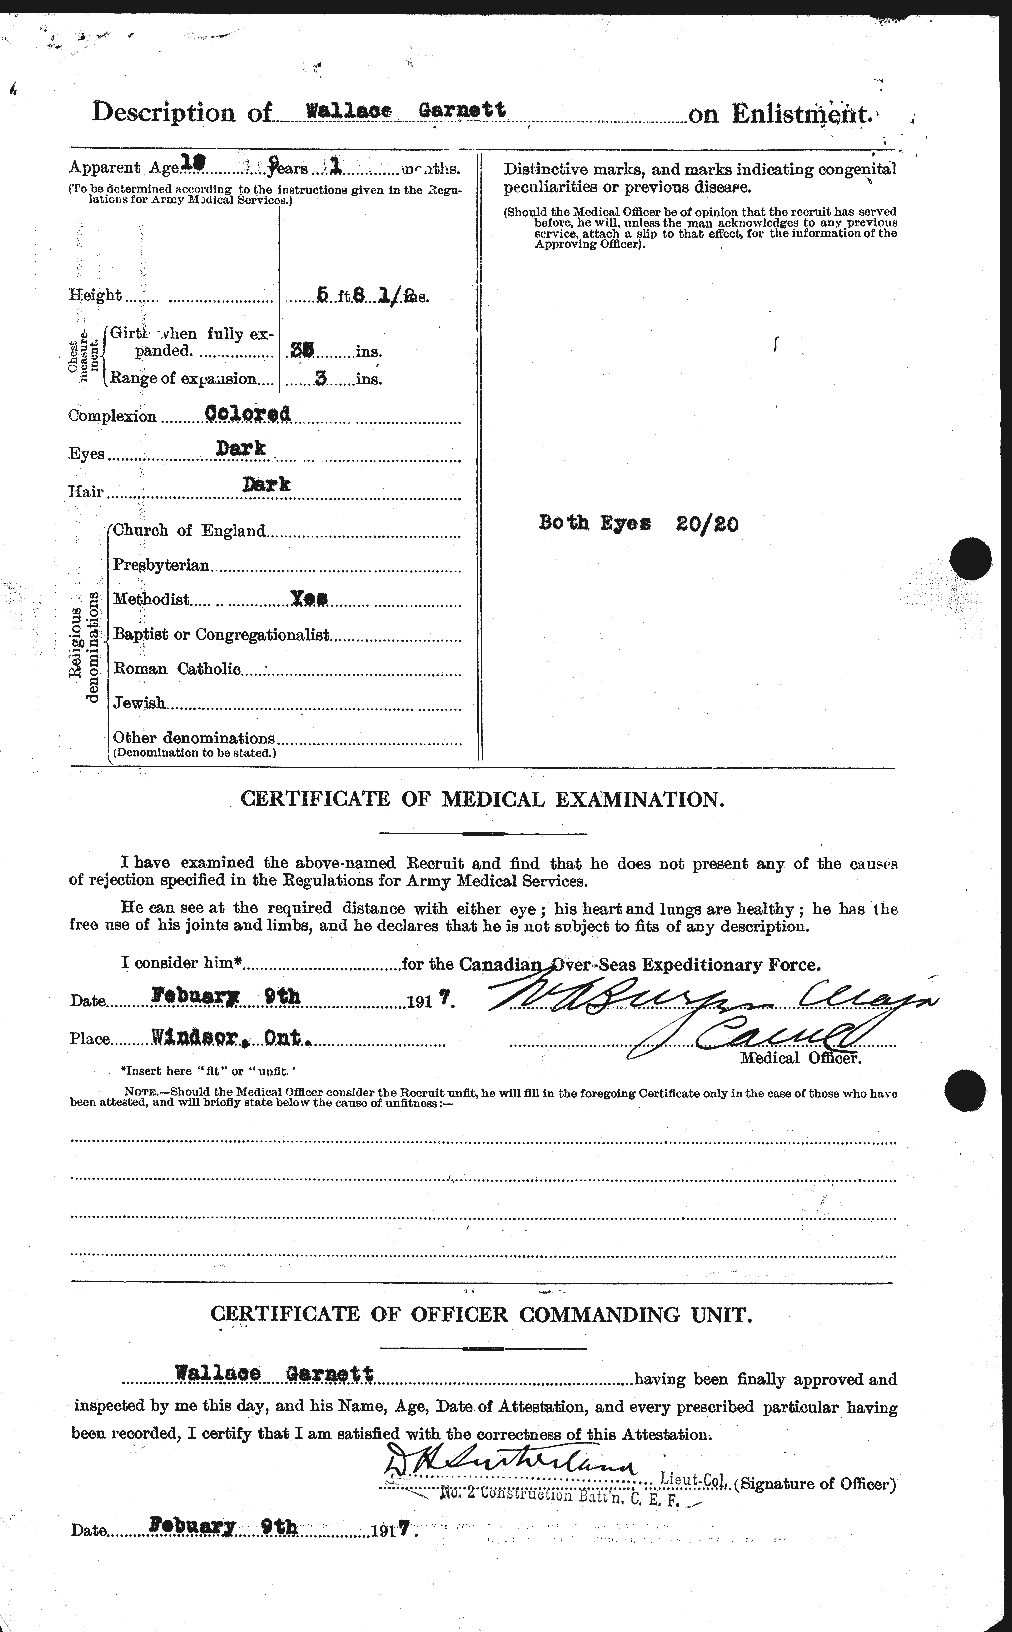 Personnel Records of the First World War - CEF 341949b